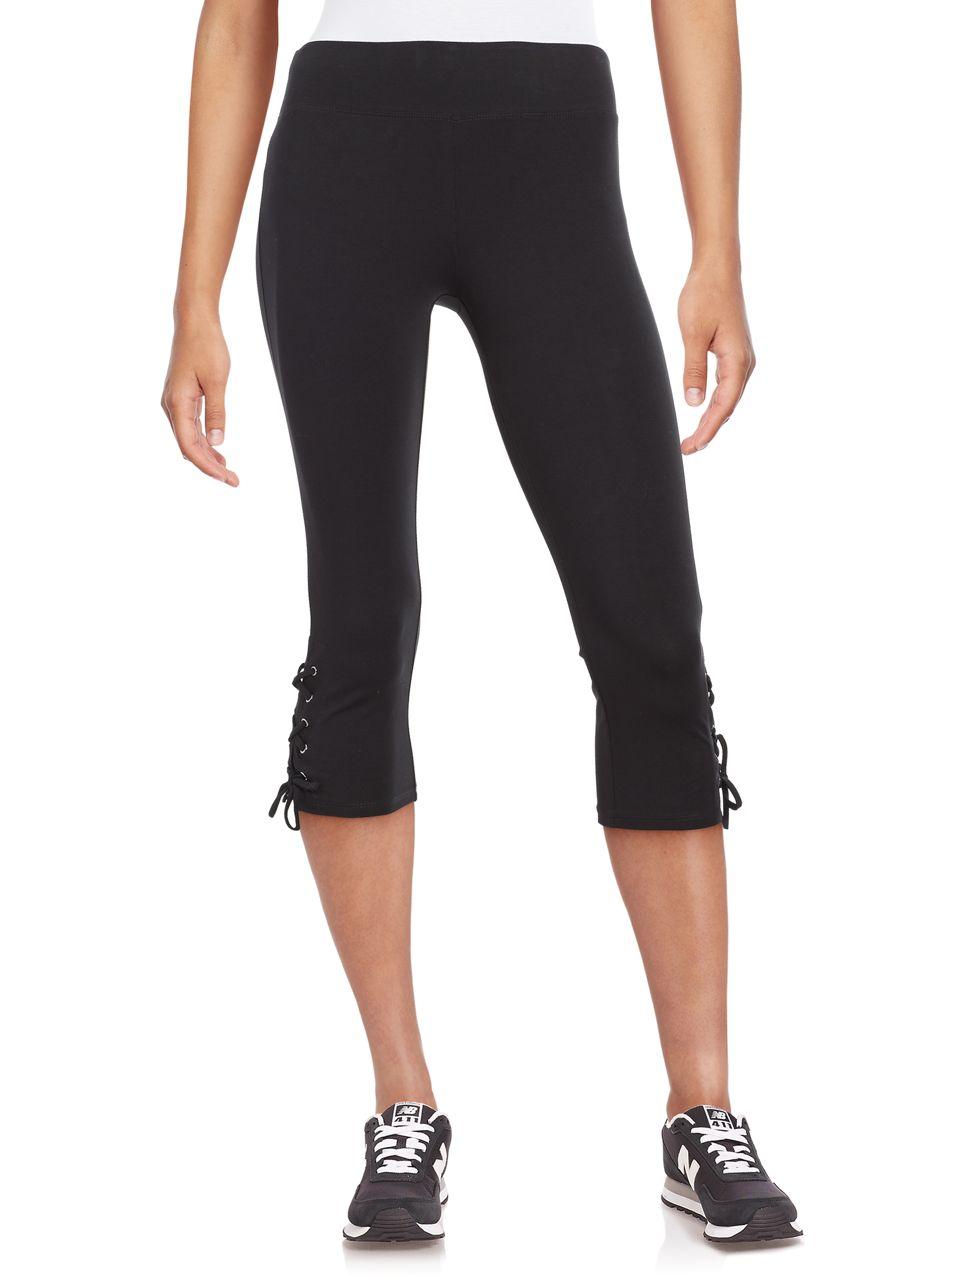 Lyst - Marc New York Lace-up Cuff Yoga Pants in Black